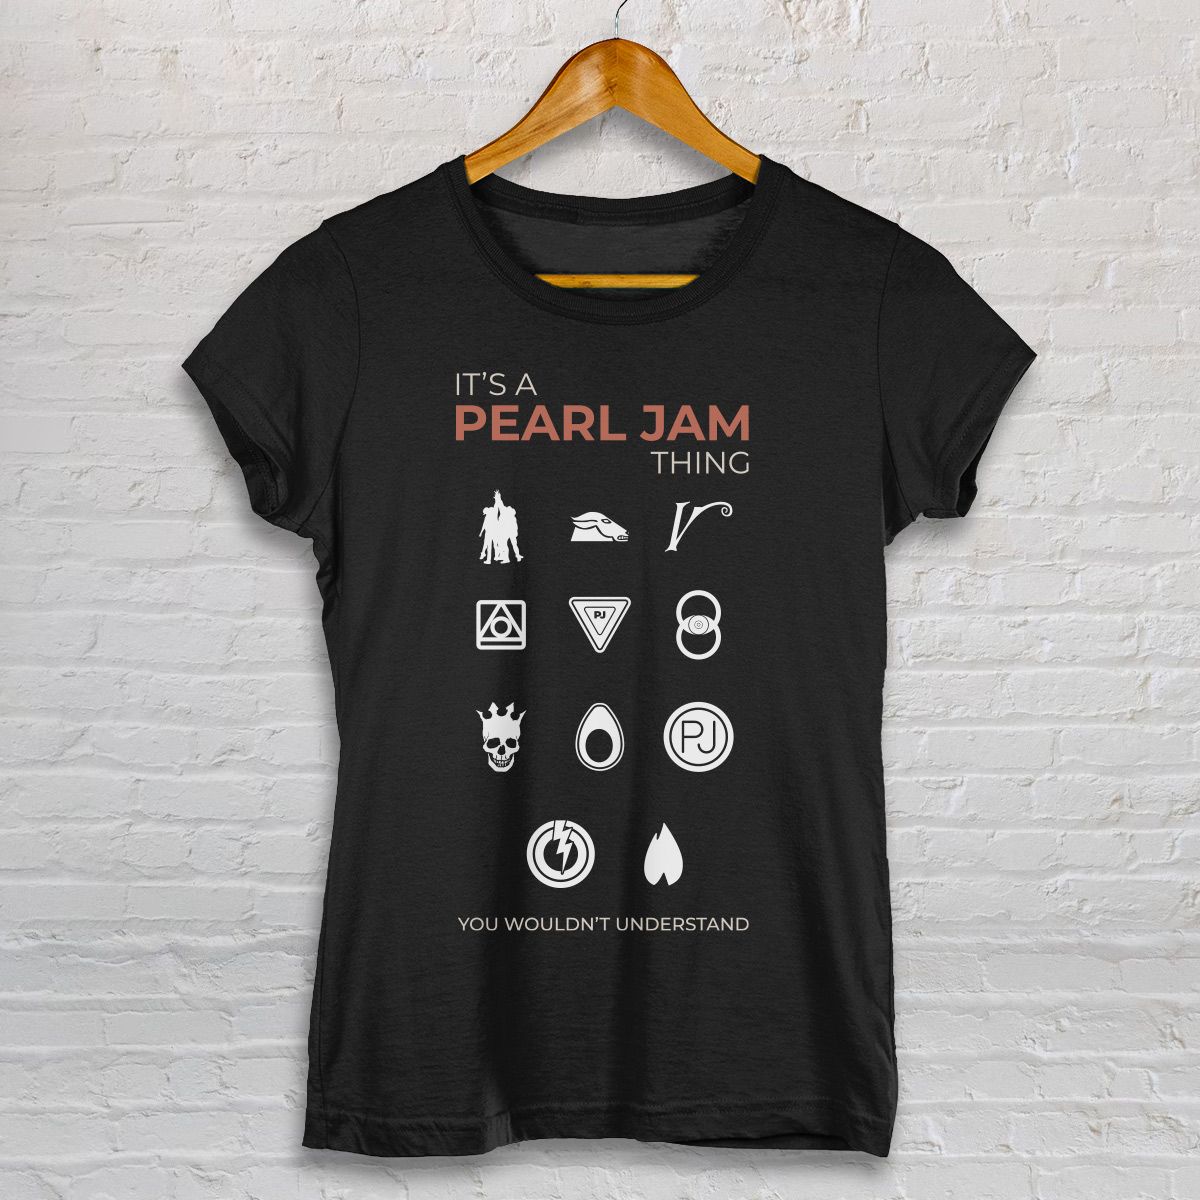 Nome do produto: BABY LOOK - PEARL JAM - YOU WOULDNT UNDERSTAND